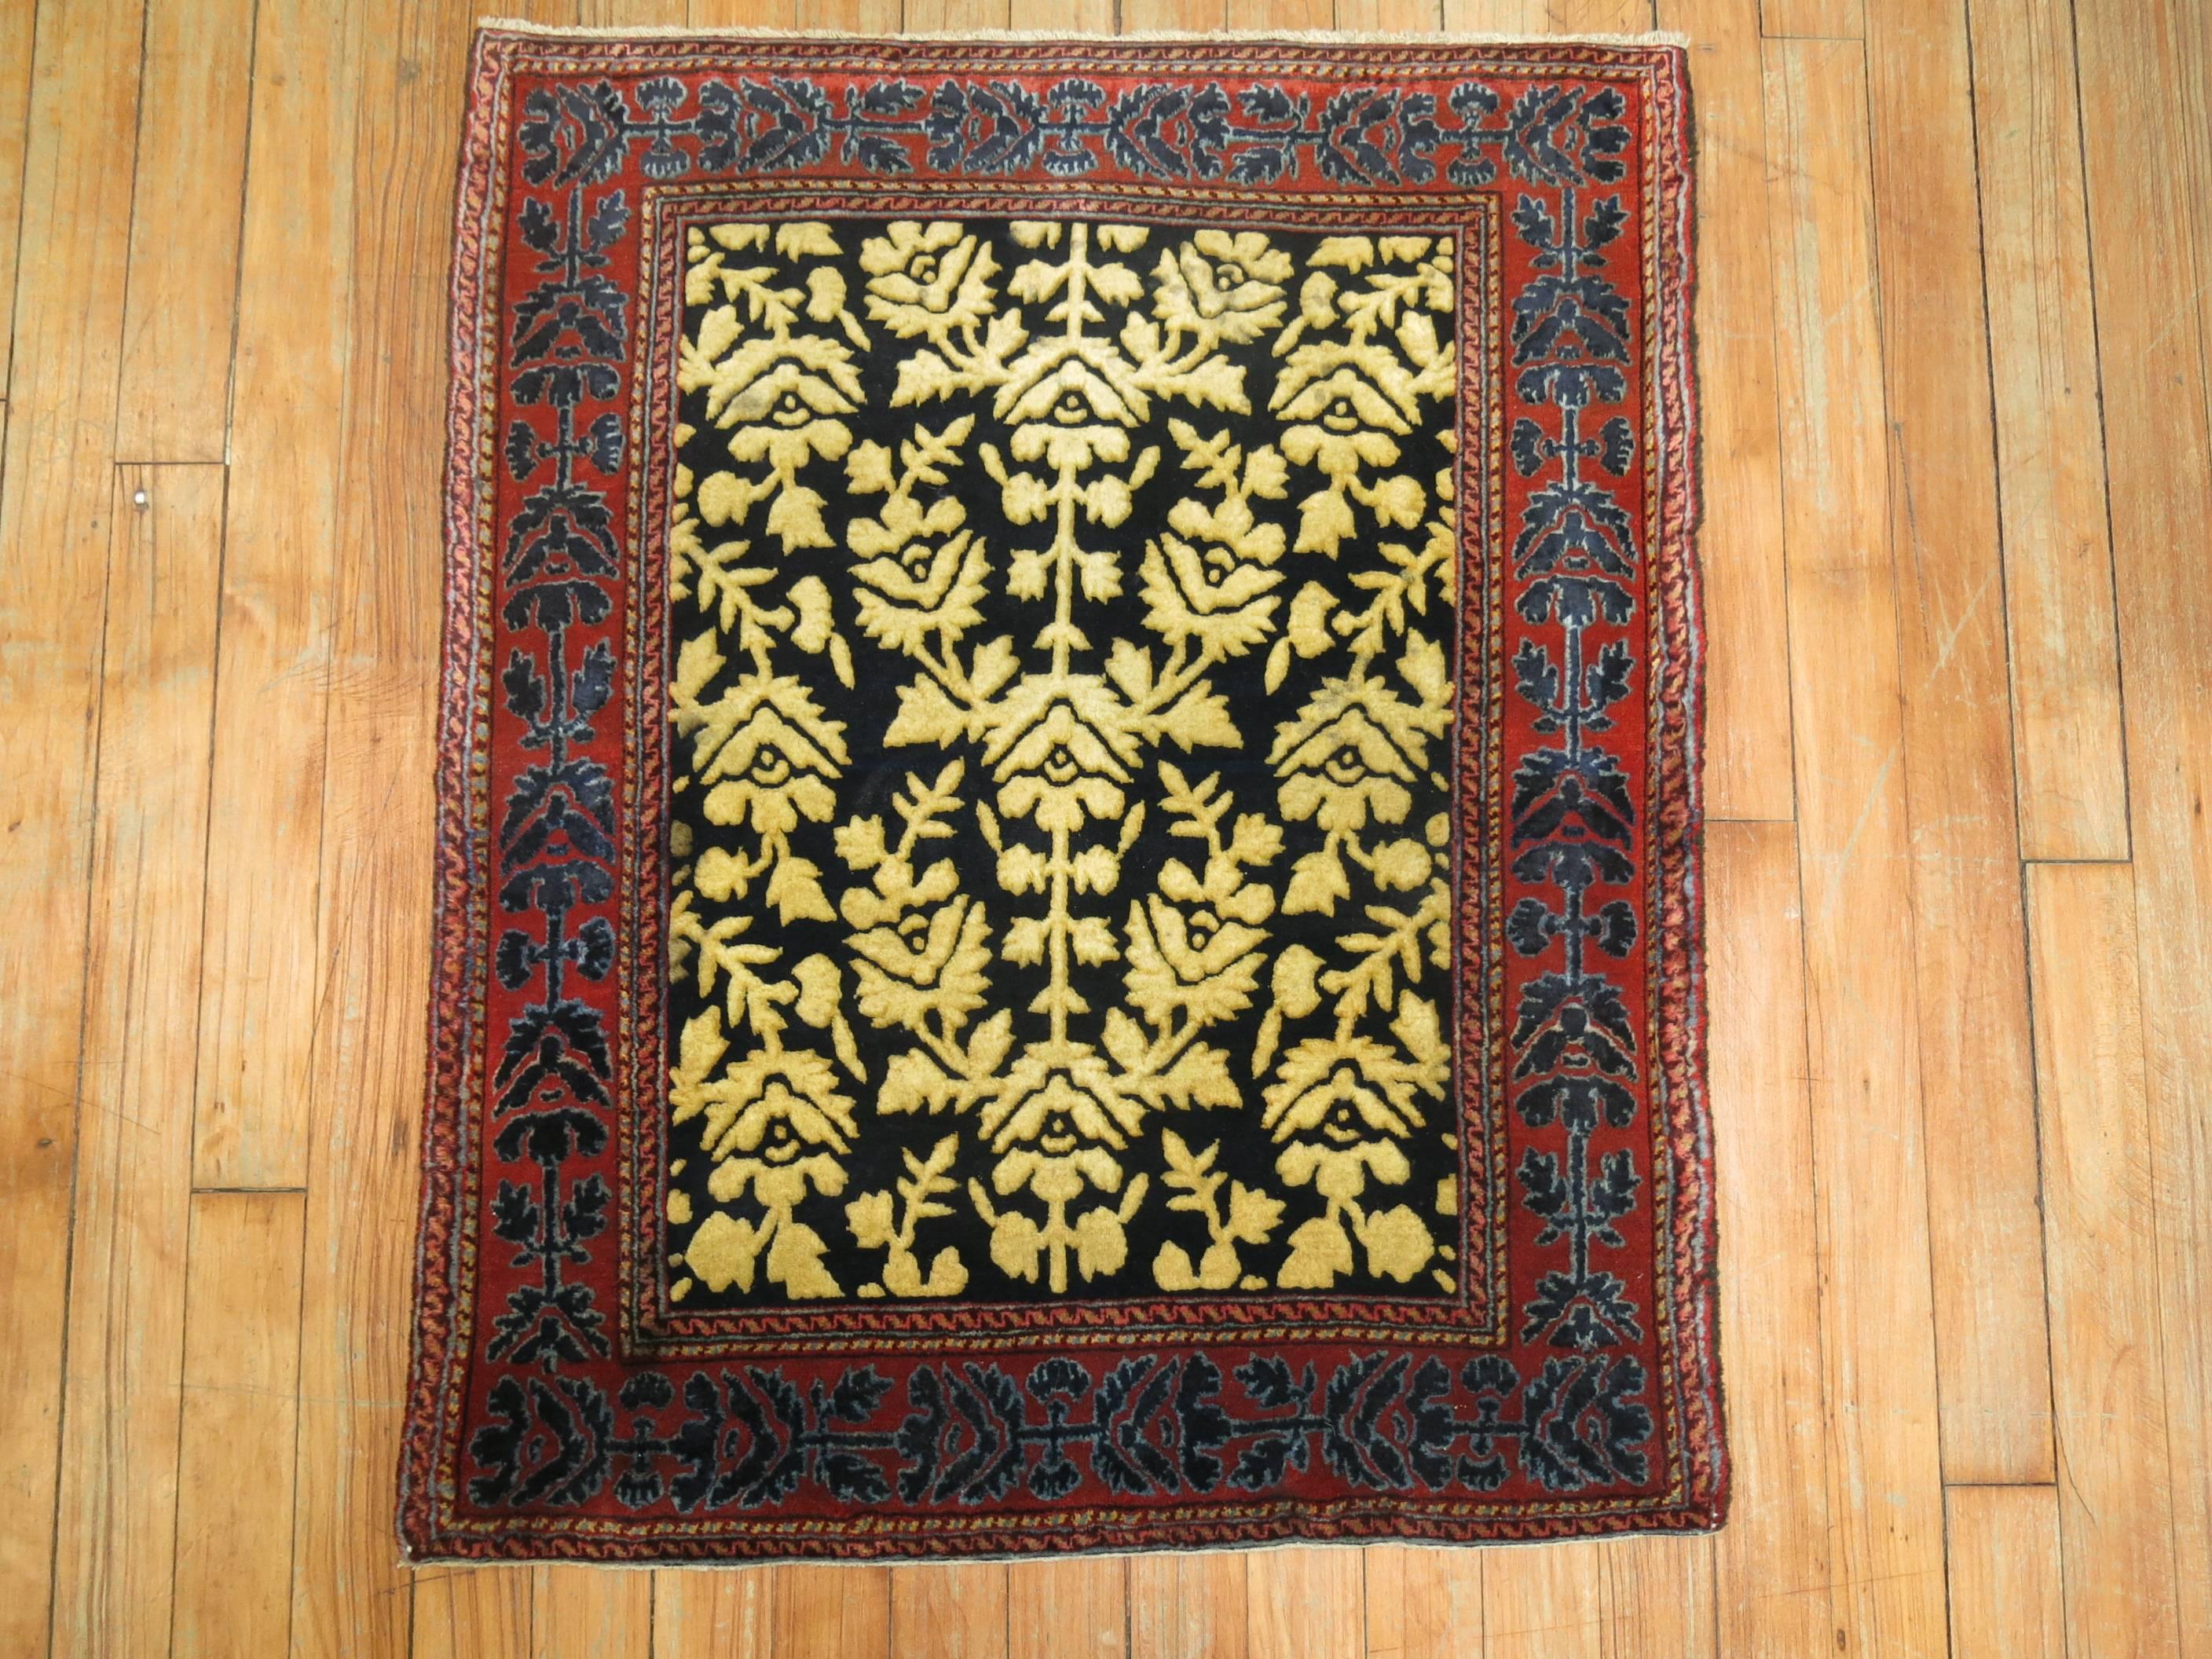 An early 20th century Souf carpet woven somewhere in Iran. Whereabouts are unknown but we suspect it’s from the sarouk Jozan region.

2'1'' x 2'7''

Souf rugs are very rare technique found as they have a raised low and high pile technique. They are